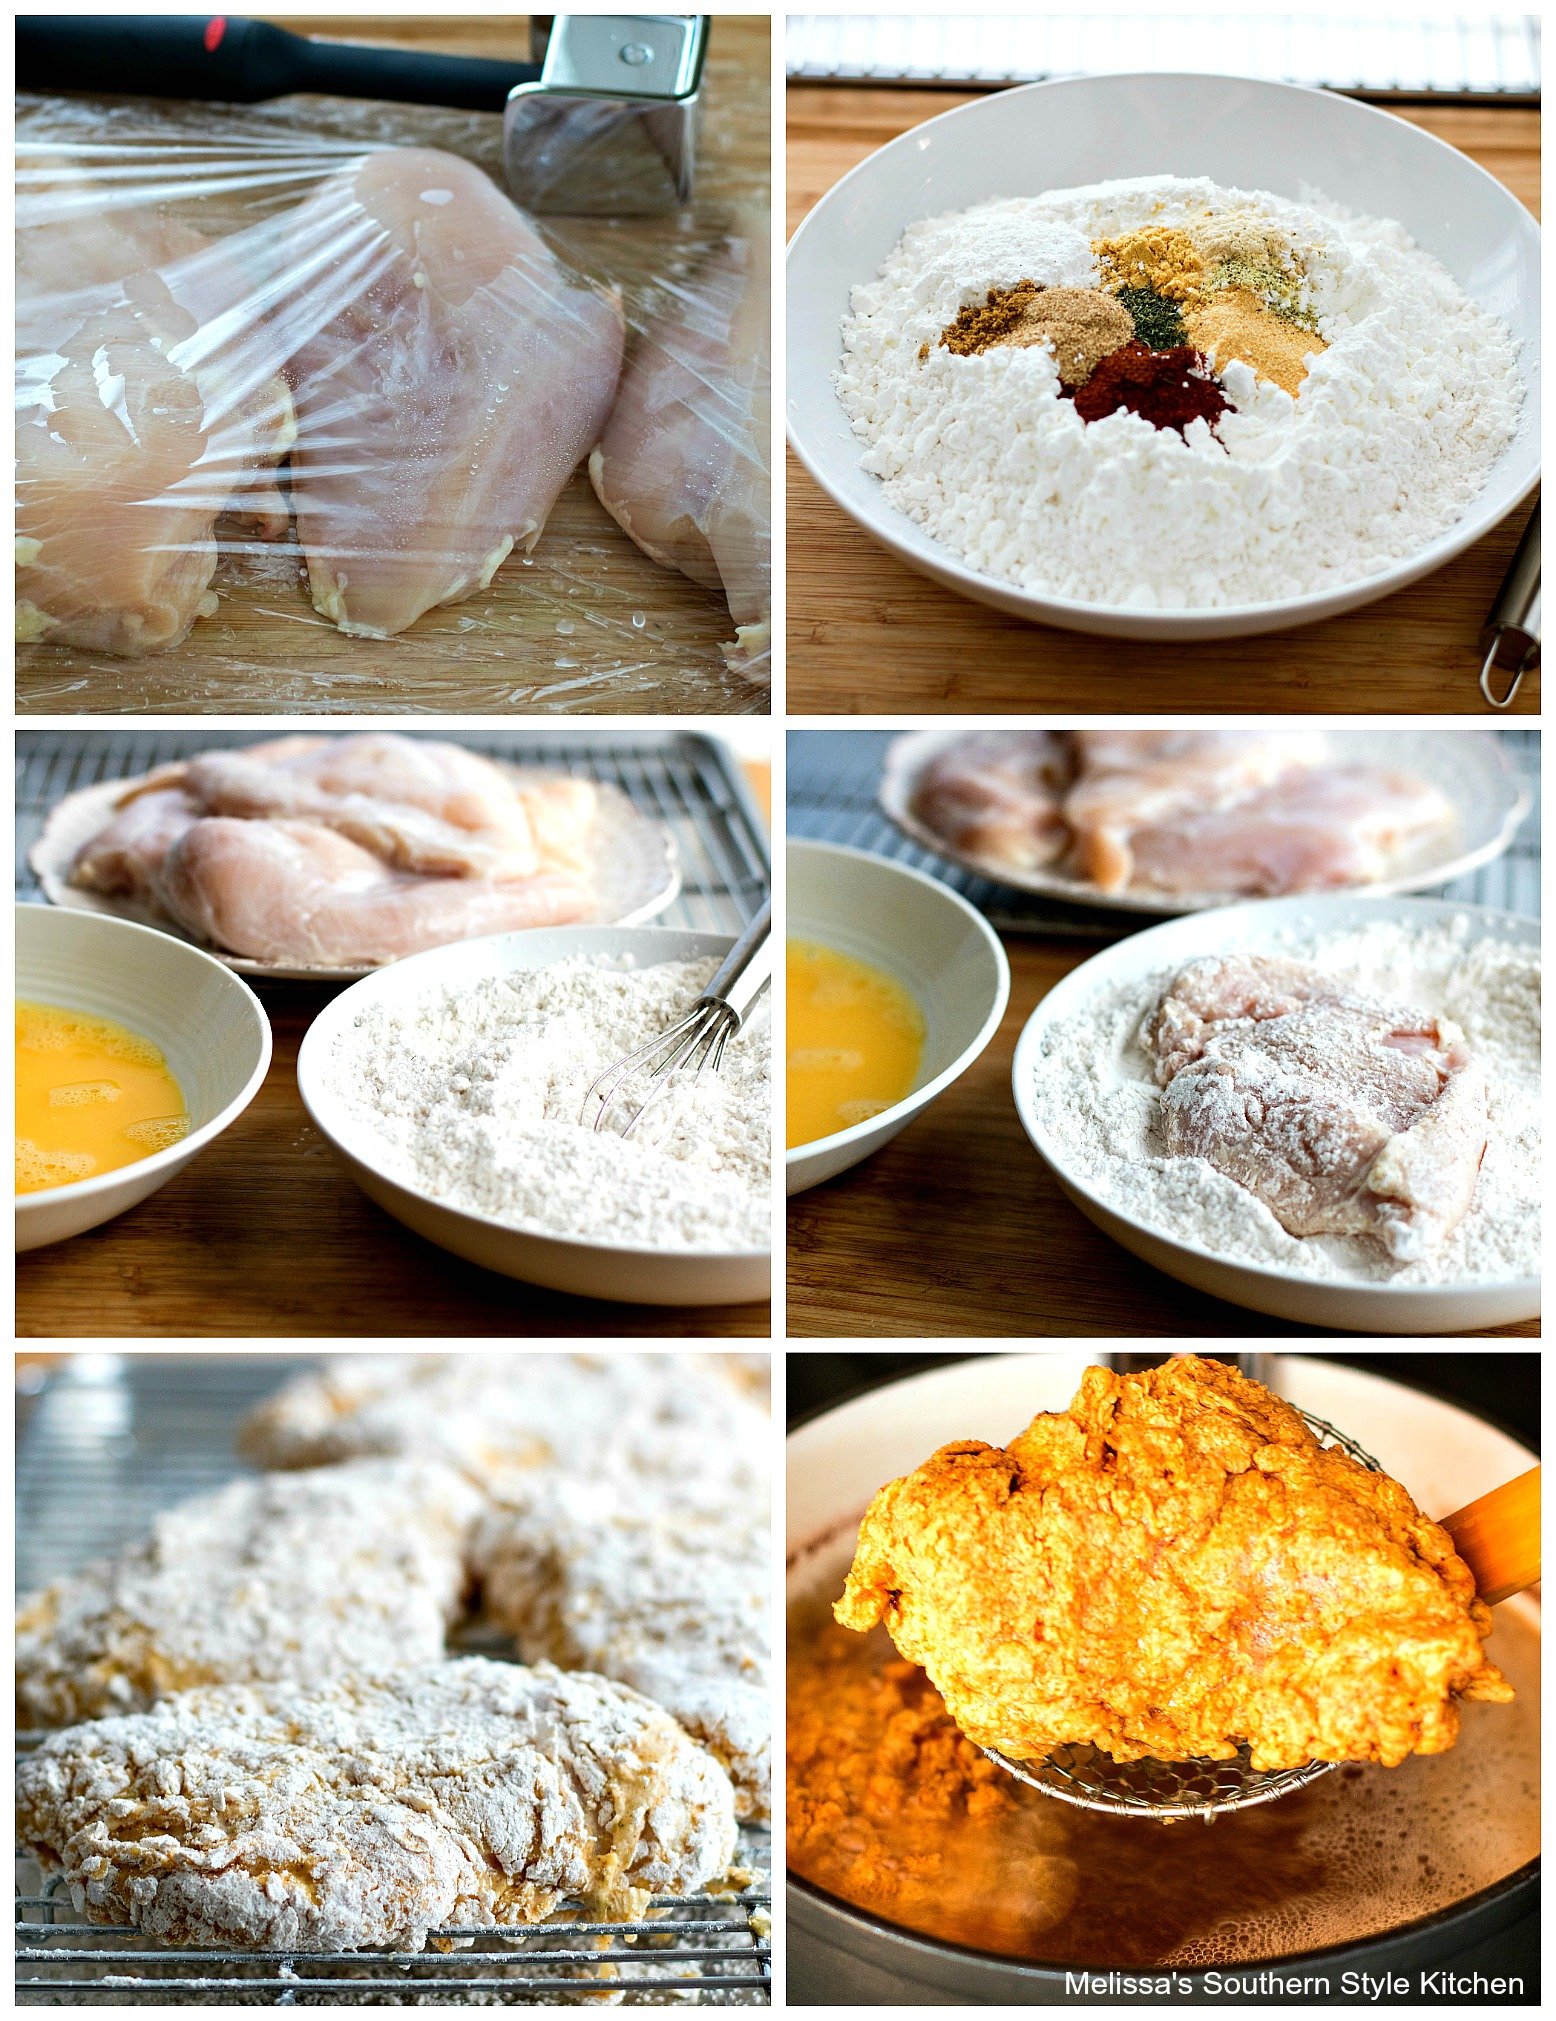 ingredients to make crispy chicken and step-by-step images